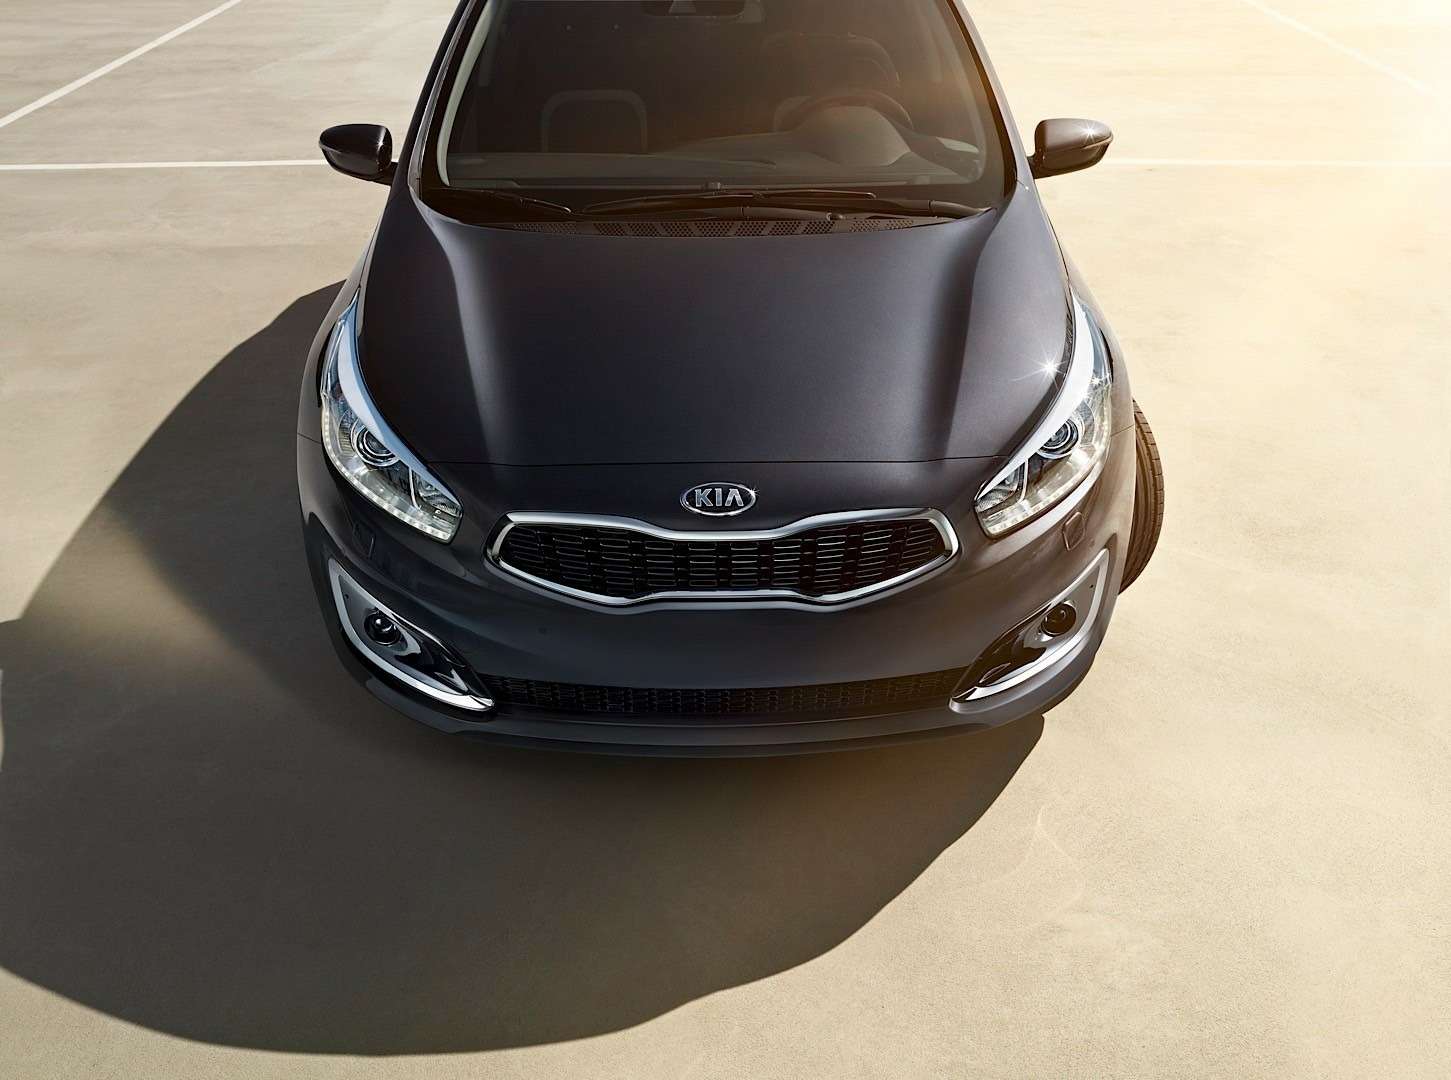 2016-kia-cee-d-brings-subtle-visual-upgrades-new-engines-and-sporty-gt-line-photo-gallery_6